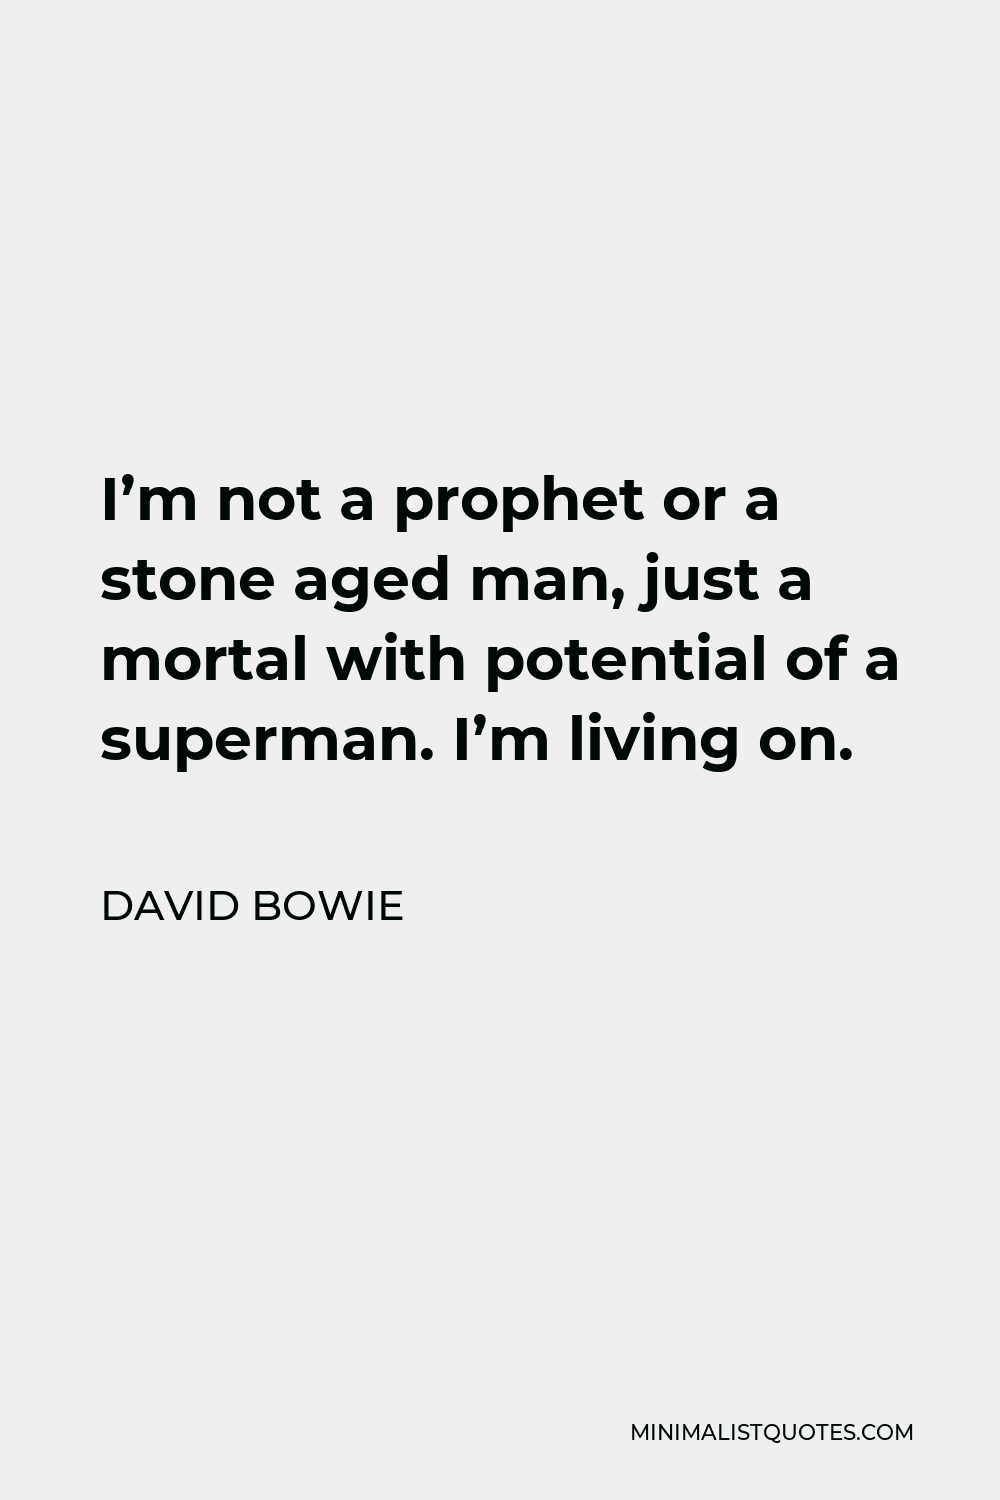 David Bowie Quote Im Not A Prophet Or A Stone Aged Man Just A Mortal With Potential Of A 2108